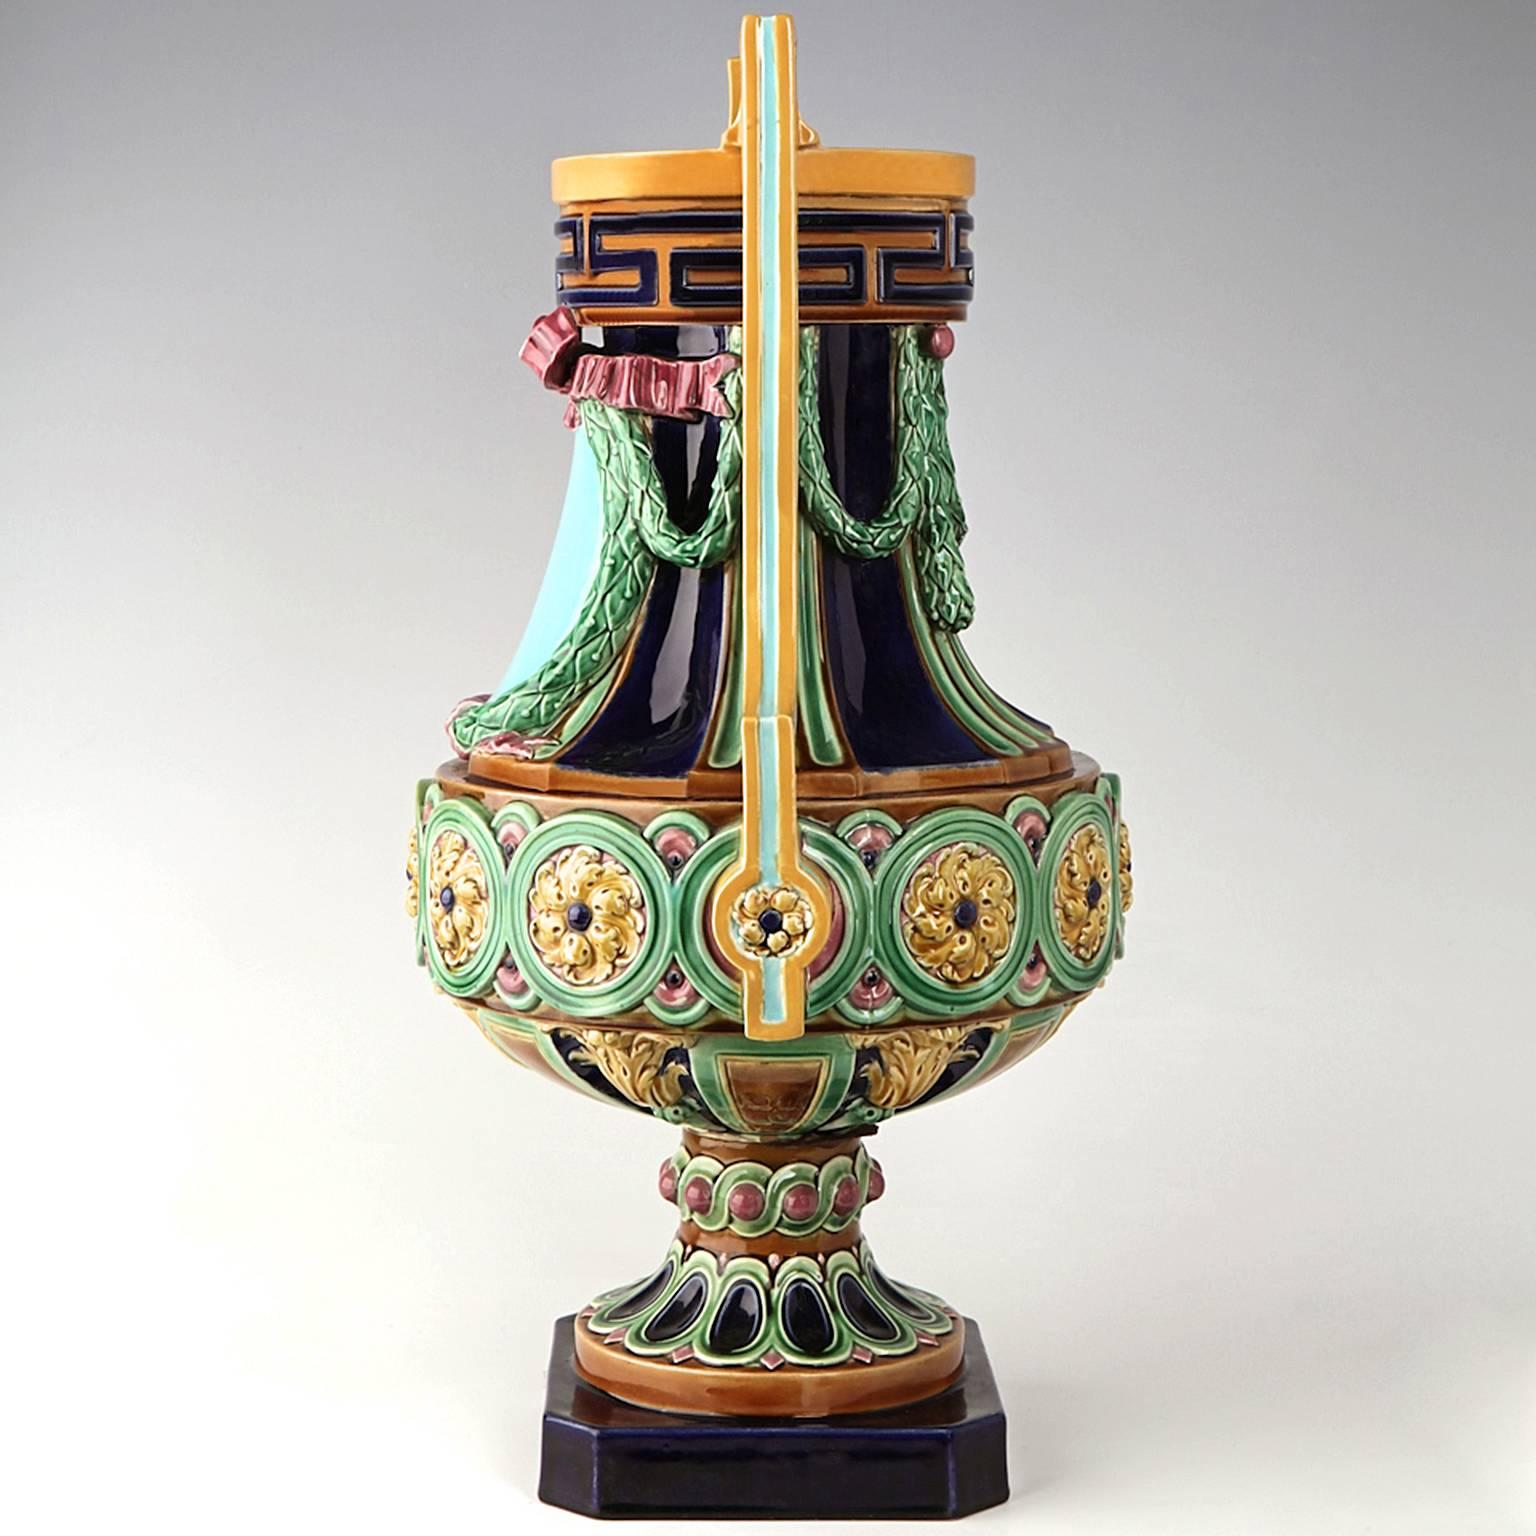 Huge Minton Majolica Vase In Excellent Condition For Sale In Litchfield, CT